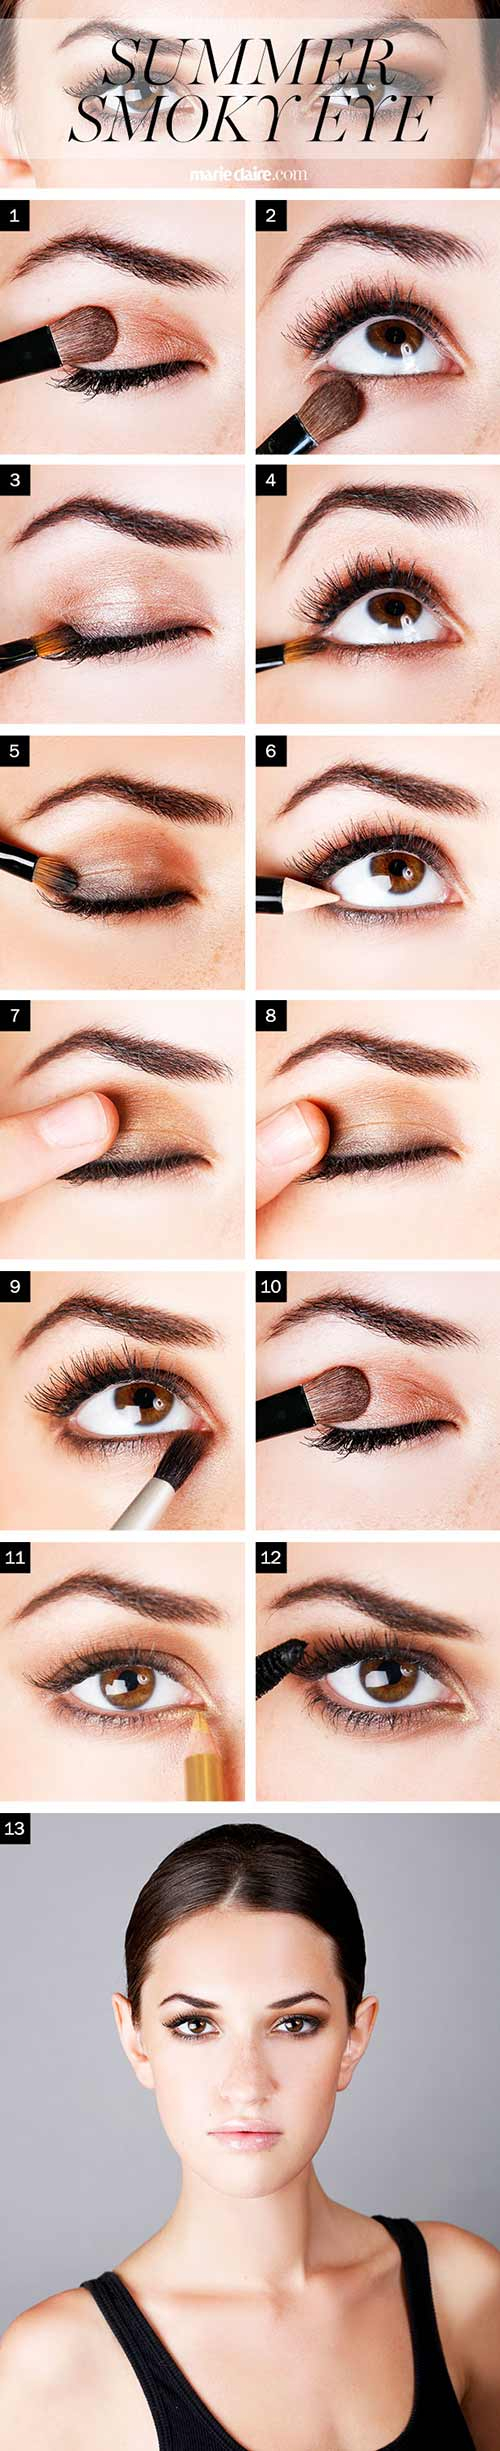 Makeup Tutorial For Brown Eyes How To Do Smokey Eye Makeup Top 10 Tutorial Pictures For 2019